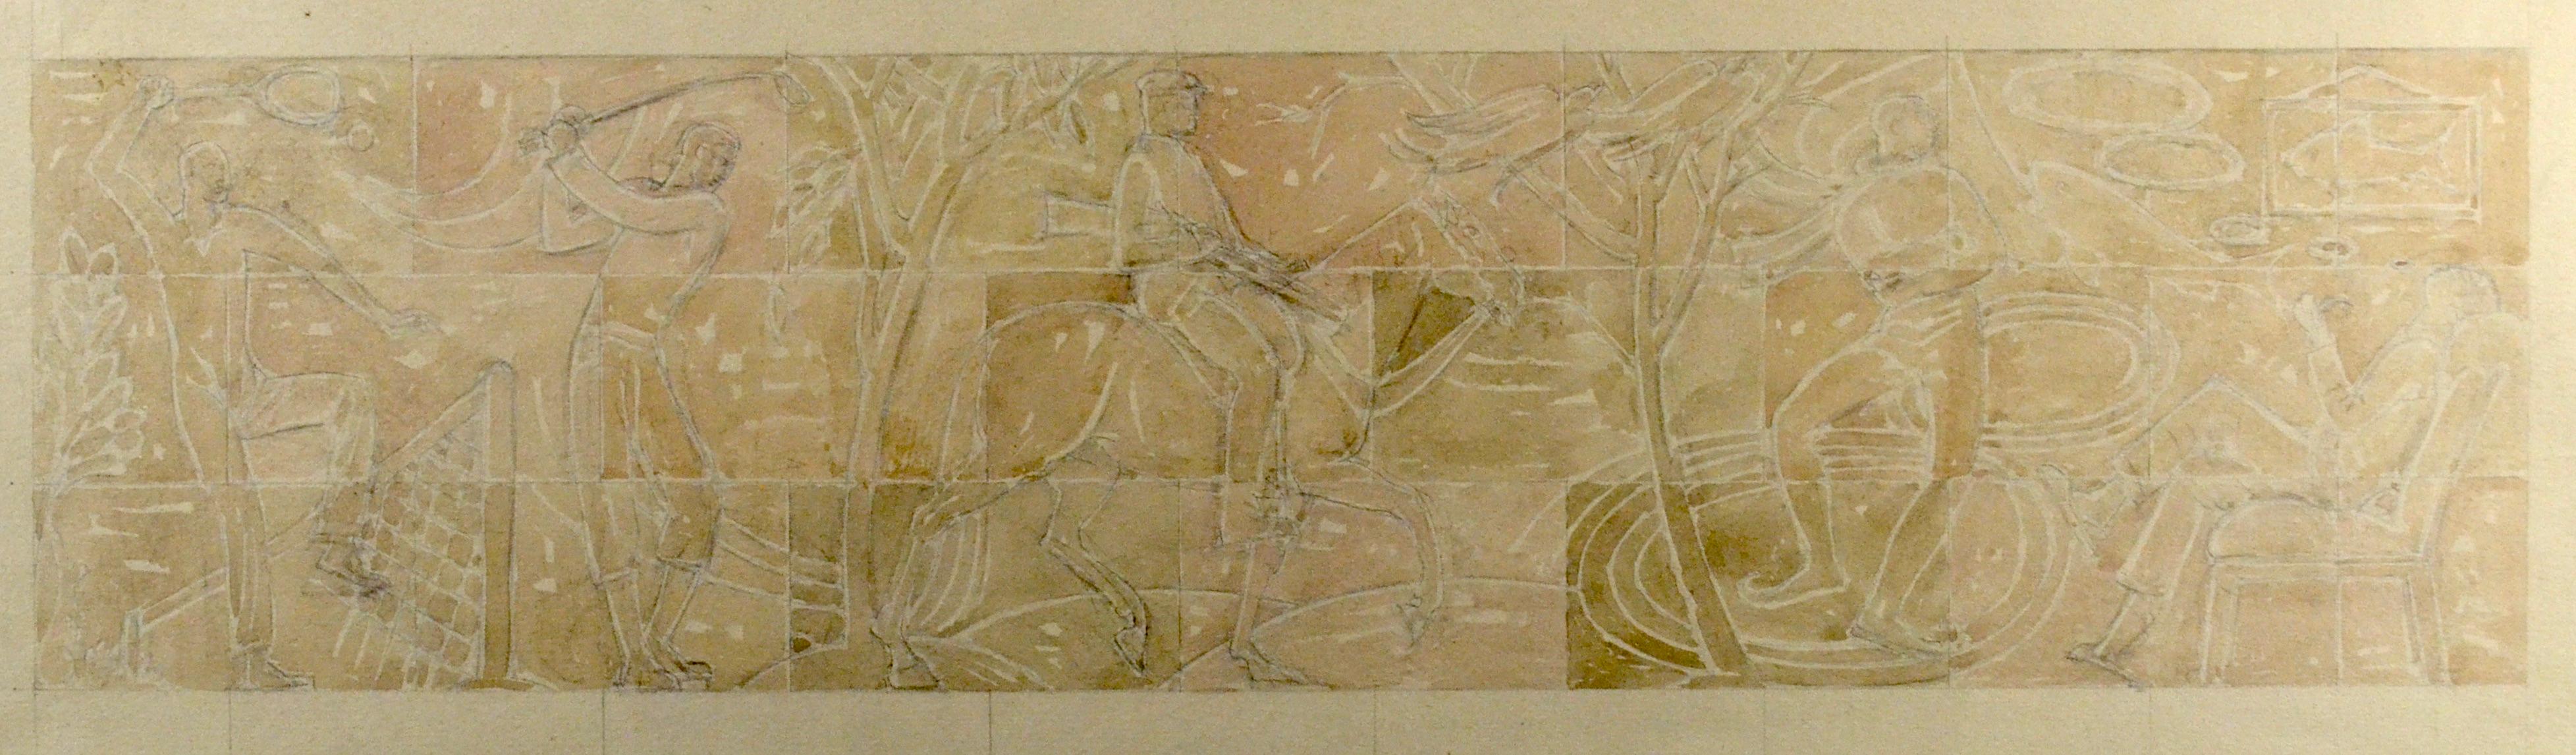 GILBERT LEDWARD, RA, PRBS
(1888-1960)

Tennis, Golf, Shooting, Ice-Skating, Dreaming – Proposed Design for Decorative Frieze in the Italian Drawing Room at Eltham Palace, commissioned by Stephen Courtauld

Signed and dated July 9th 1933
Watercolour